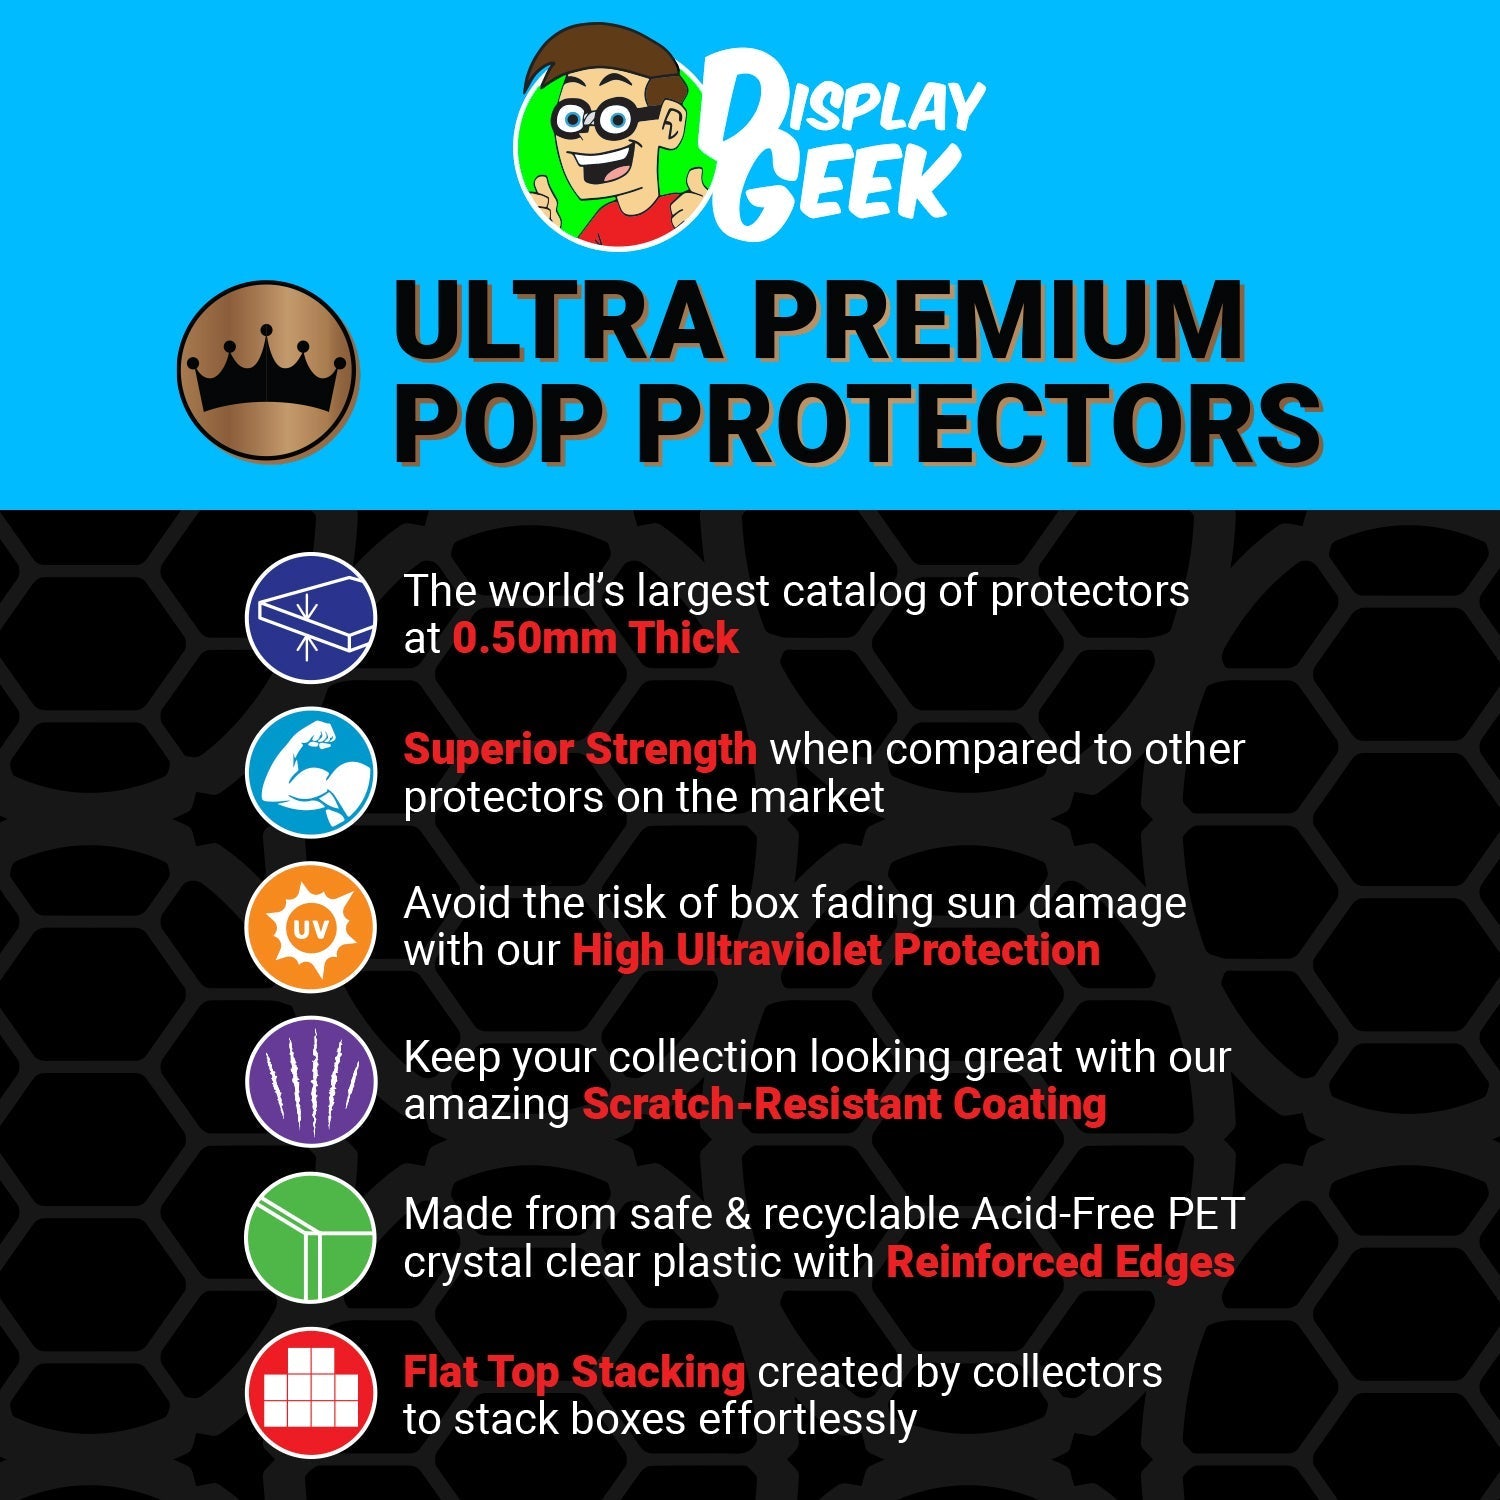 Pop Protector for The Witcher Geralt #02 Funko Pop Game Covers - PPG Pop Protector Guide Search Created by Display Geek